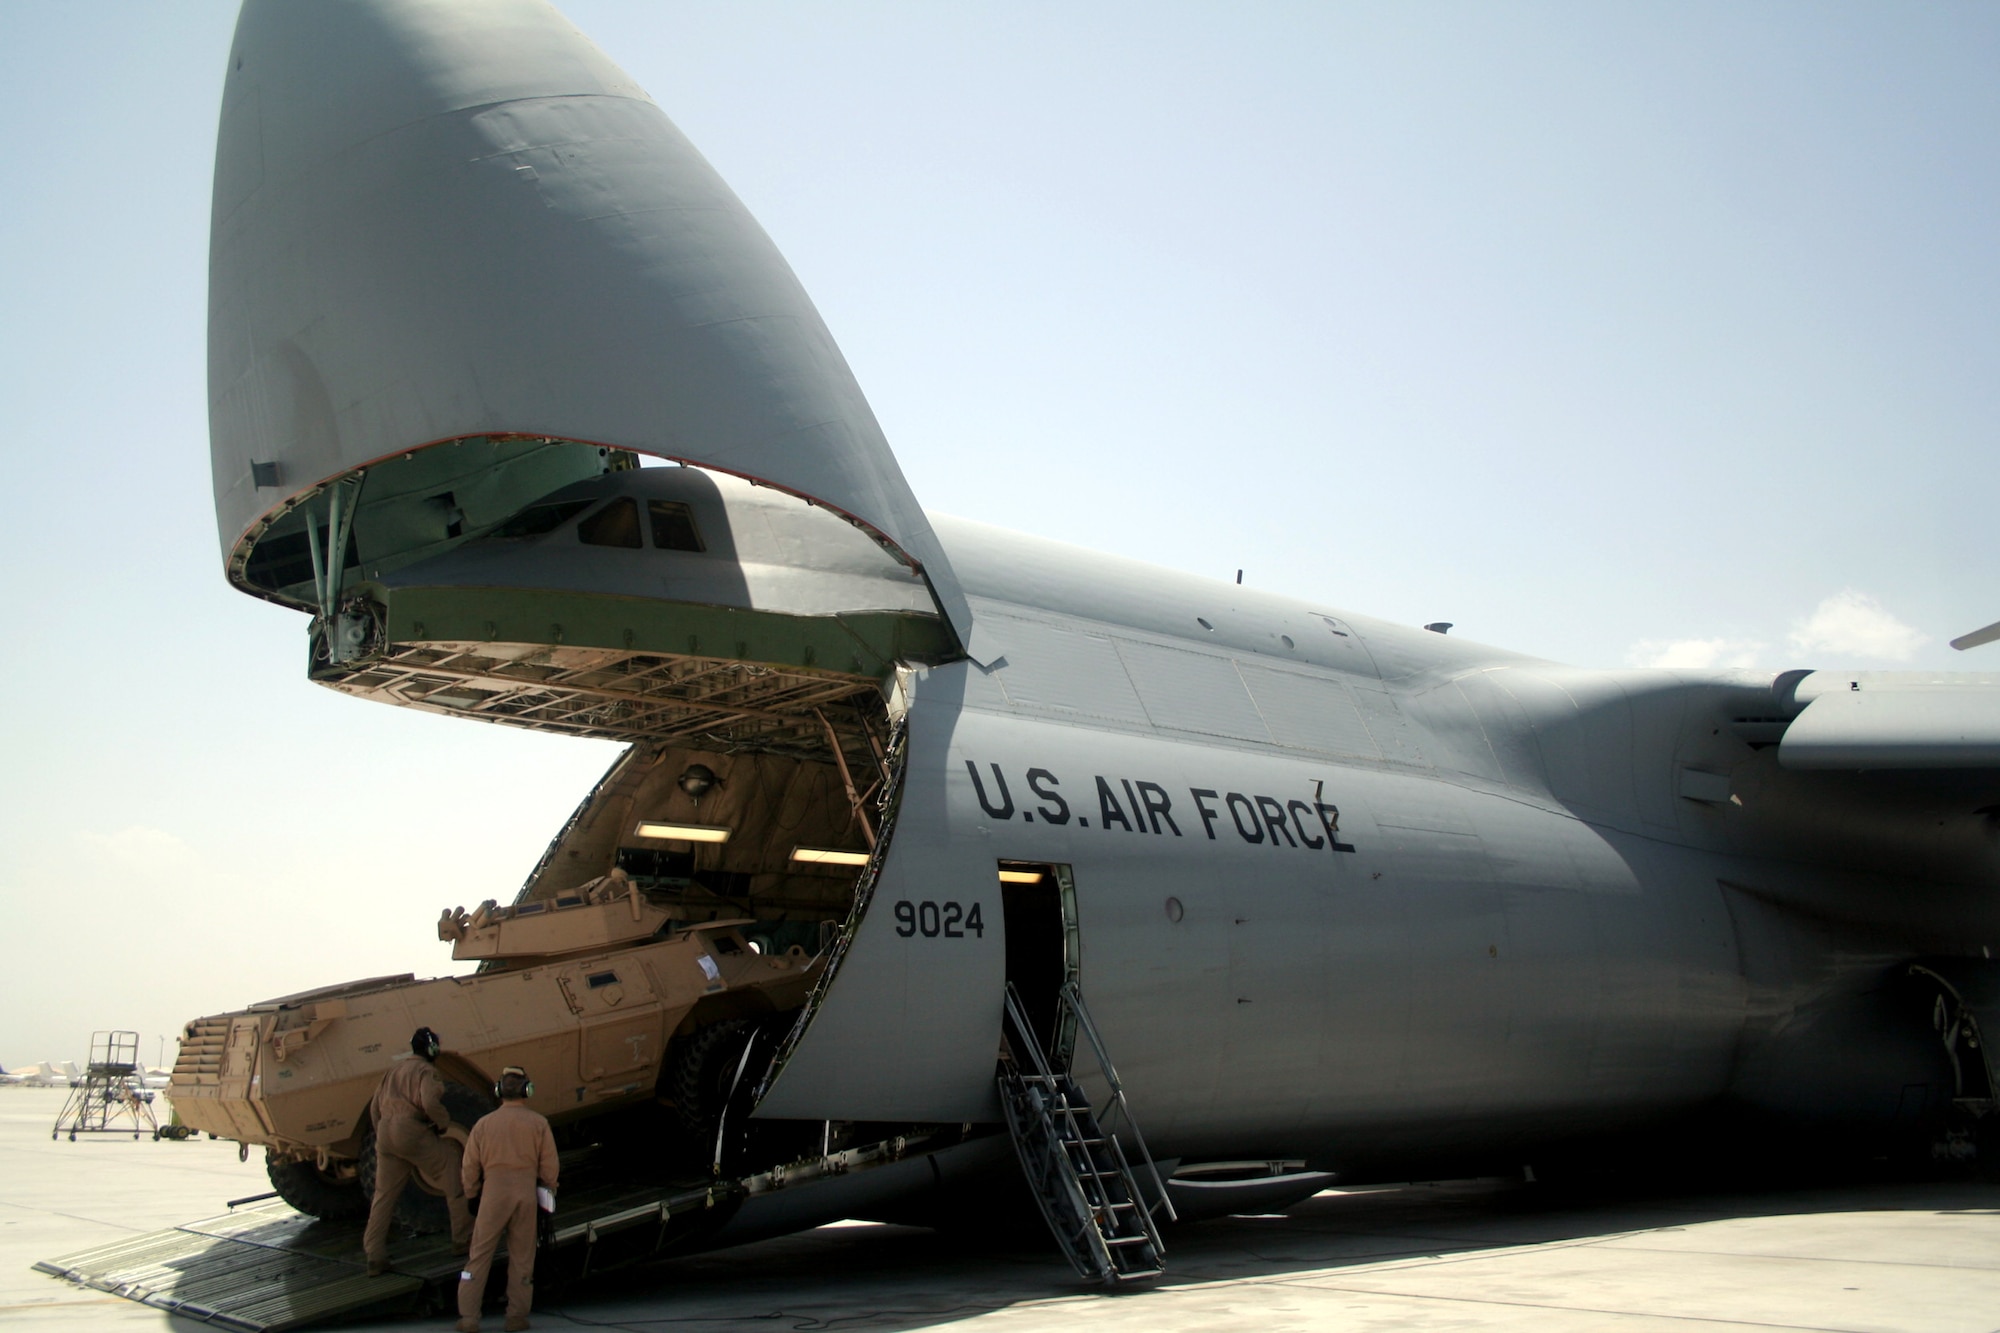 Air transportation Airmen load a C-5M Super Galaxy from Dover Air Force Base, Del., with cargo at Bagram Airfield, Afghanistan, on June 5, 2011. The C-5M's mission to Bagram was to complete the first Arctic overflight from Dover AFB to Bagram Airfield. The plane successfully landed at Bagram in just over 15 hours on June 6, 2011, then picked up cargo for the return trip back to the United States. (U.S. Air Force Photo/Master Sgt. Scott T. Sturkol)